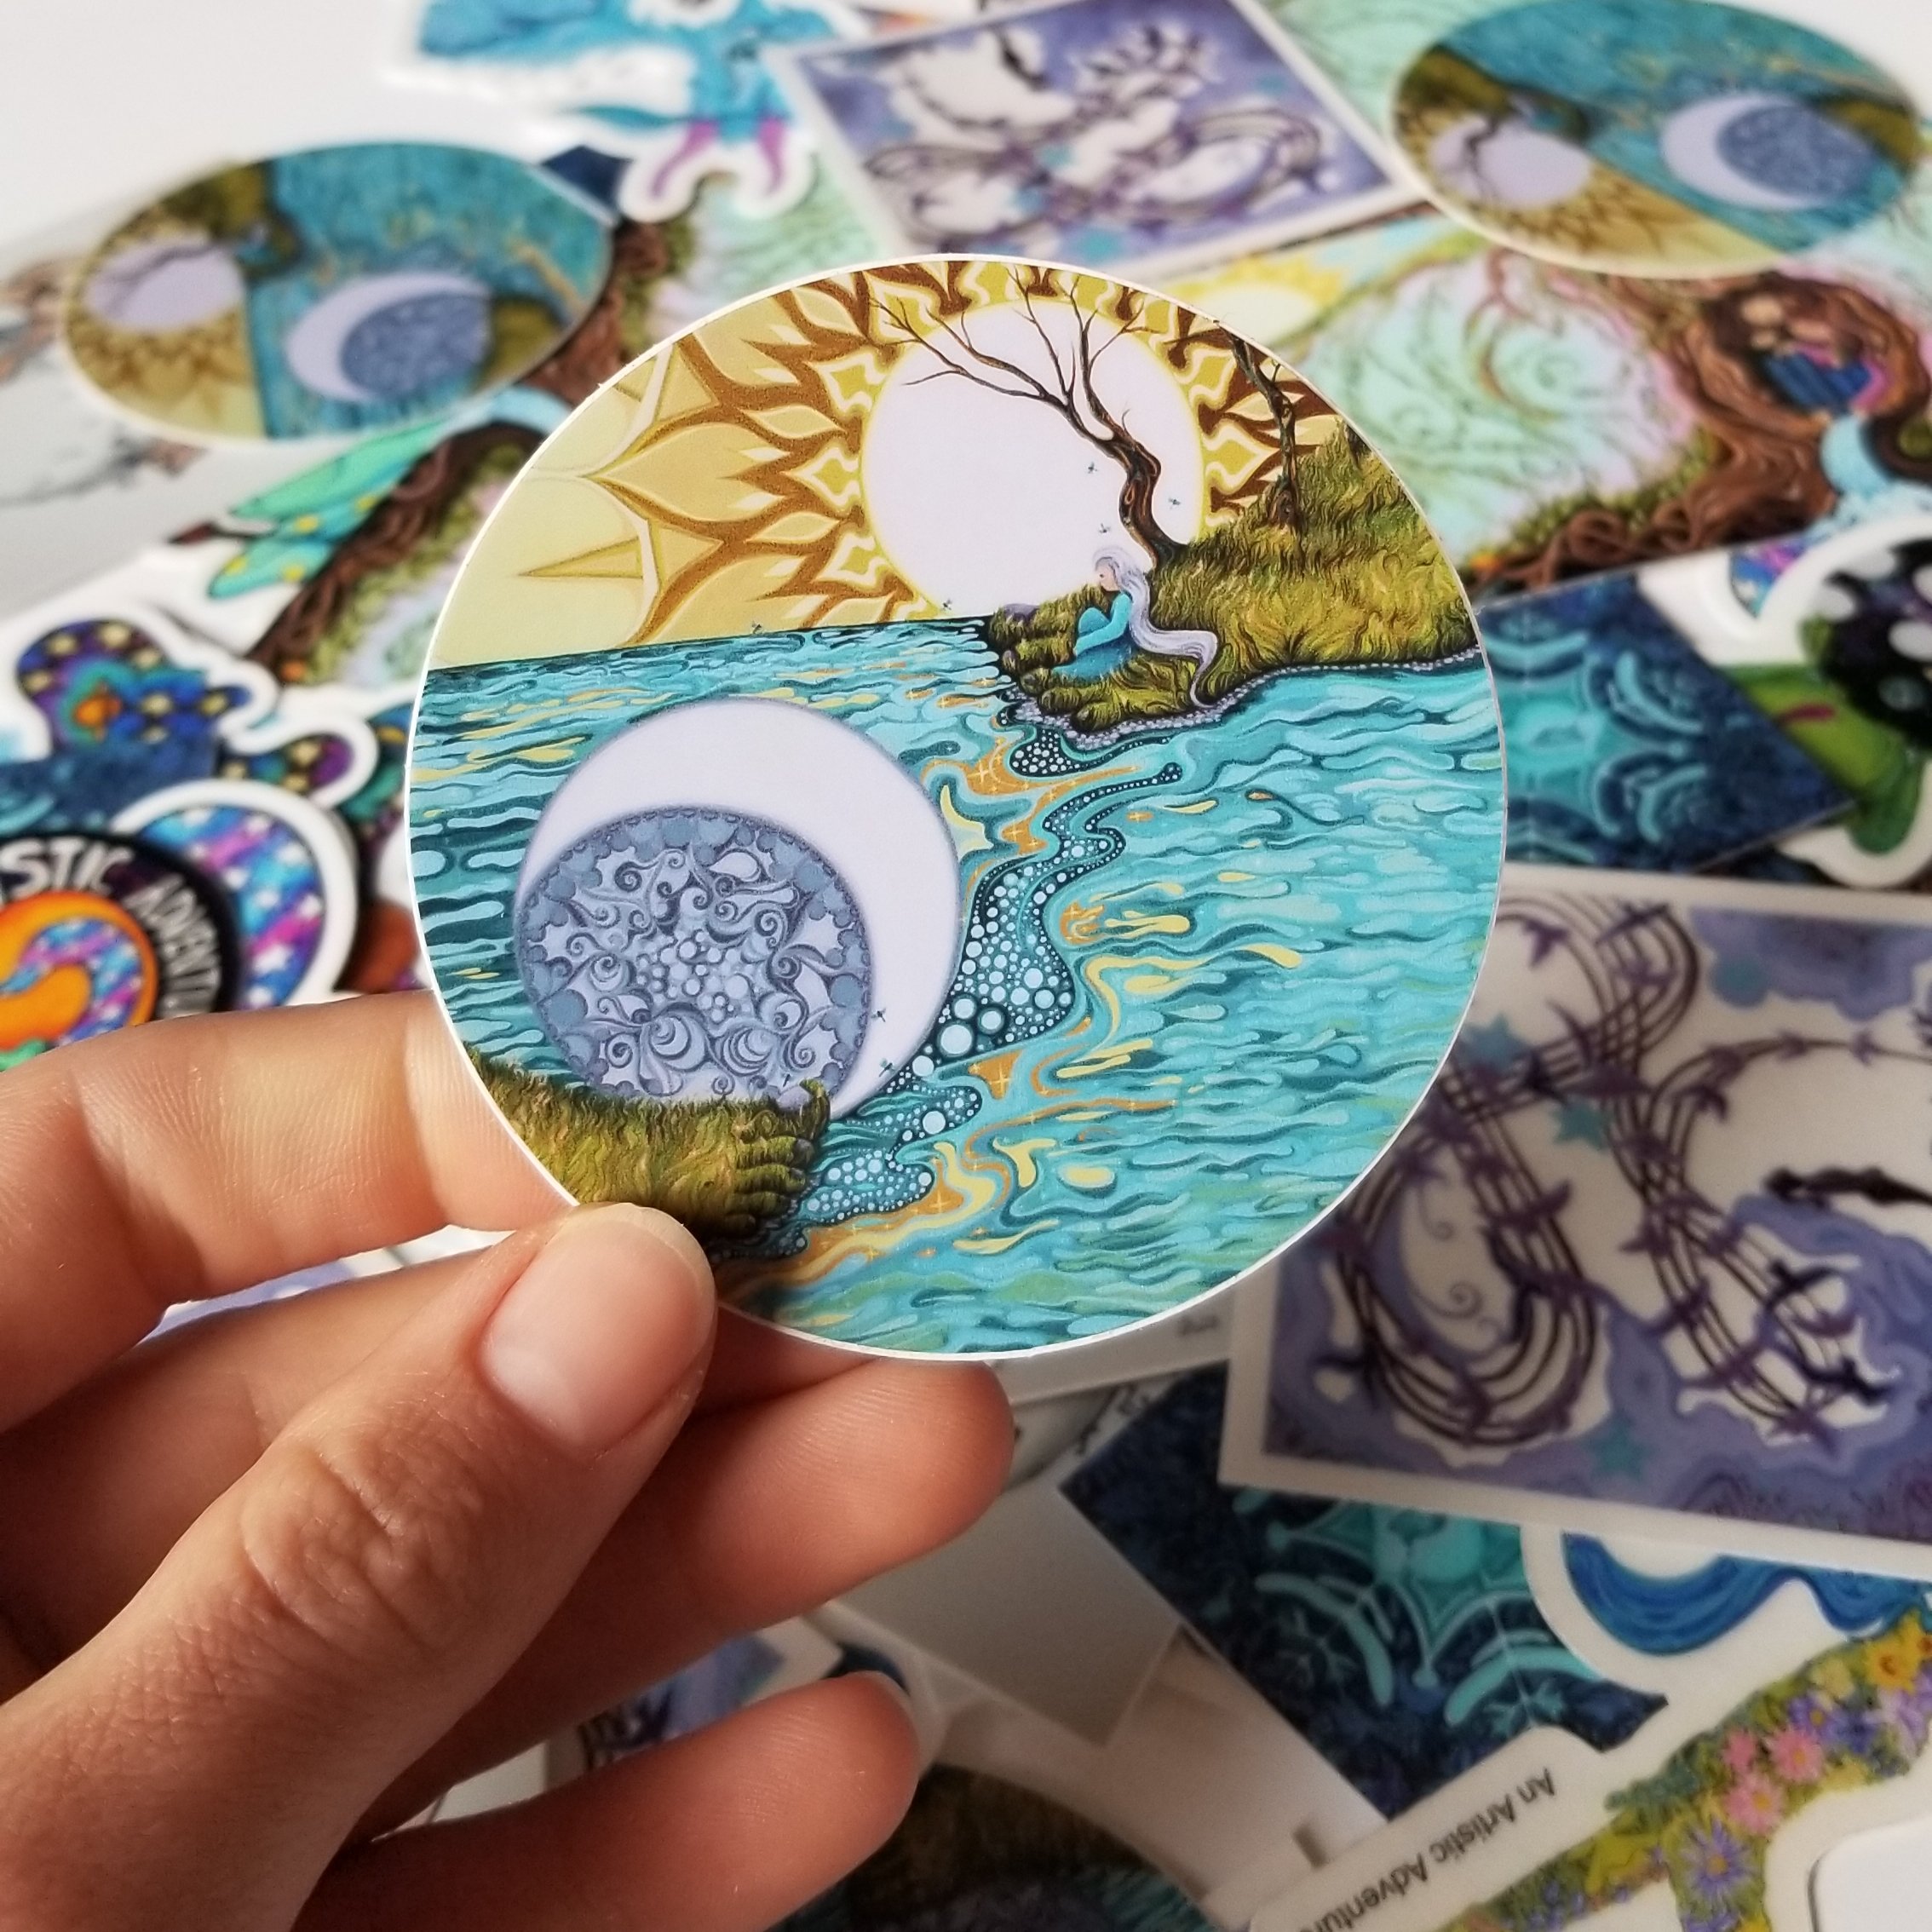 a-secret-place-sticker-buy-stickers-from-independent-artists-unique-artisan-stickers.jpg